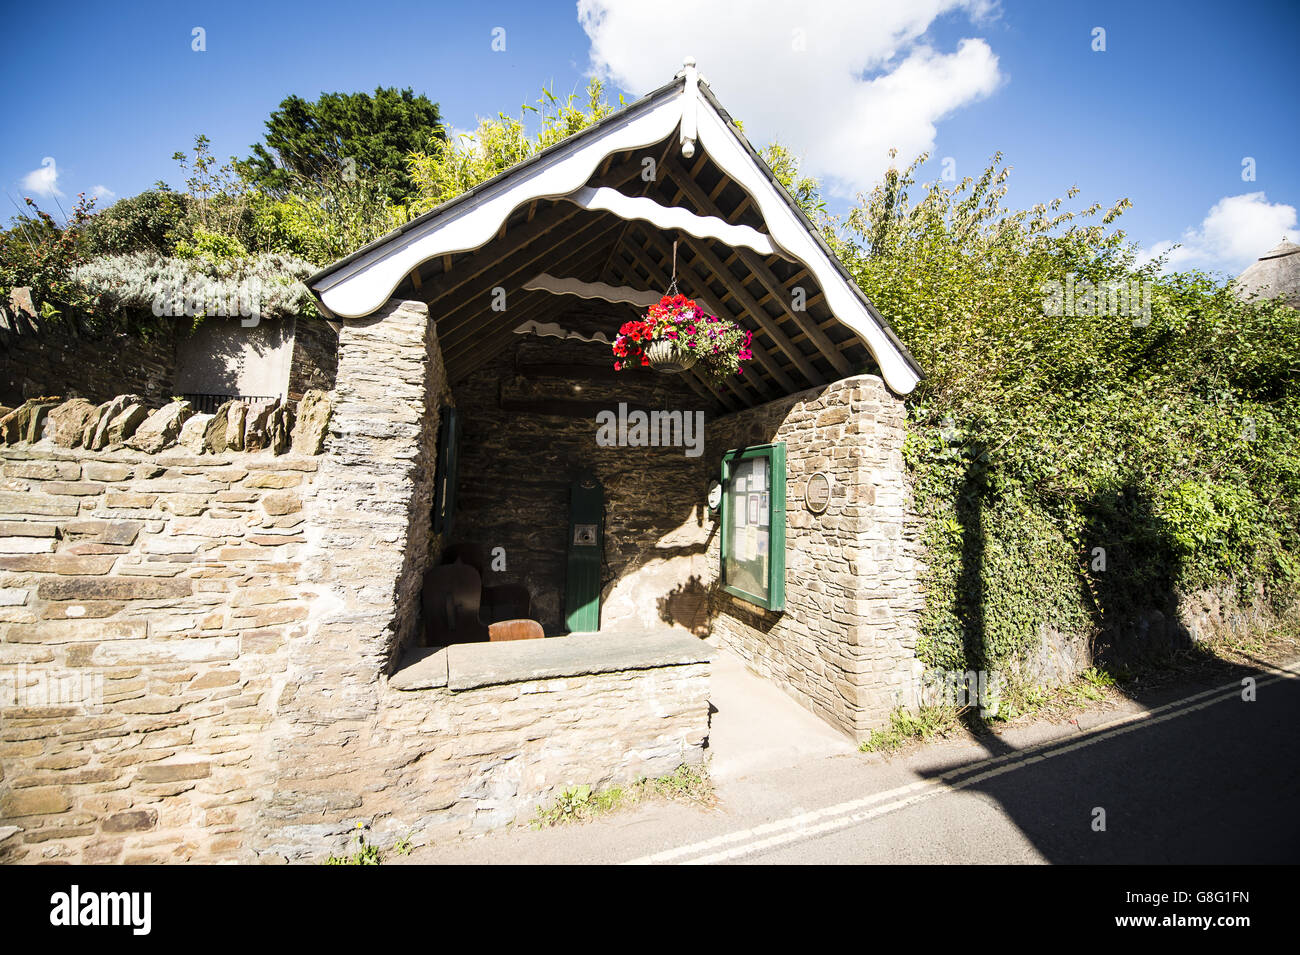 The 16th Century Thurlestone Well in the village of Thurlestone, Devon. PRESS ASSOCIATION Photo. Picture date: September, 26, 2015. Photo credit should read: Ben Birchall Stock Photo